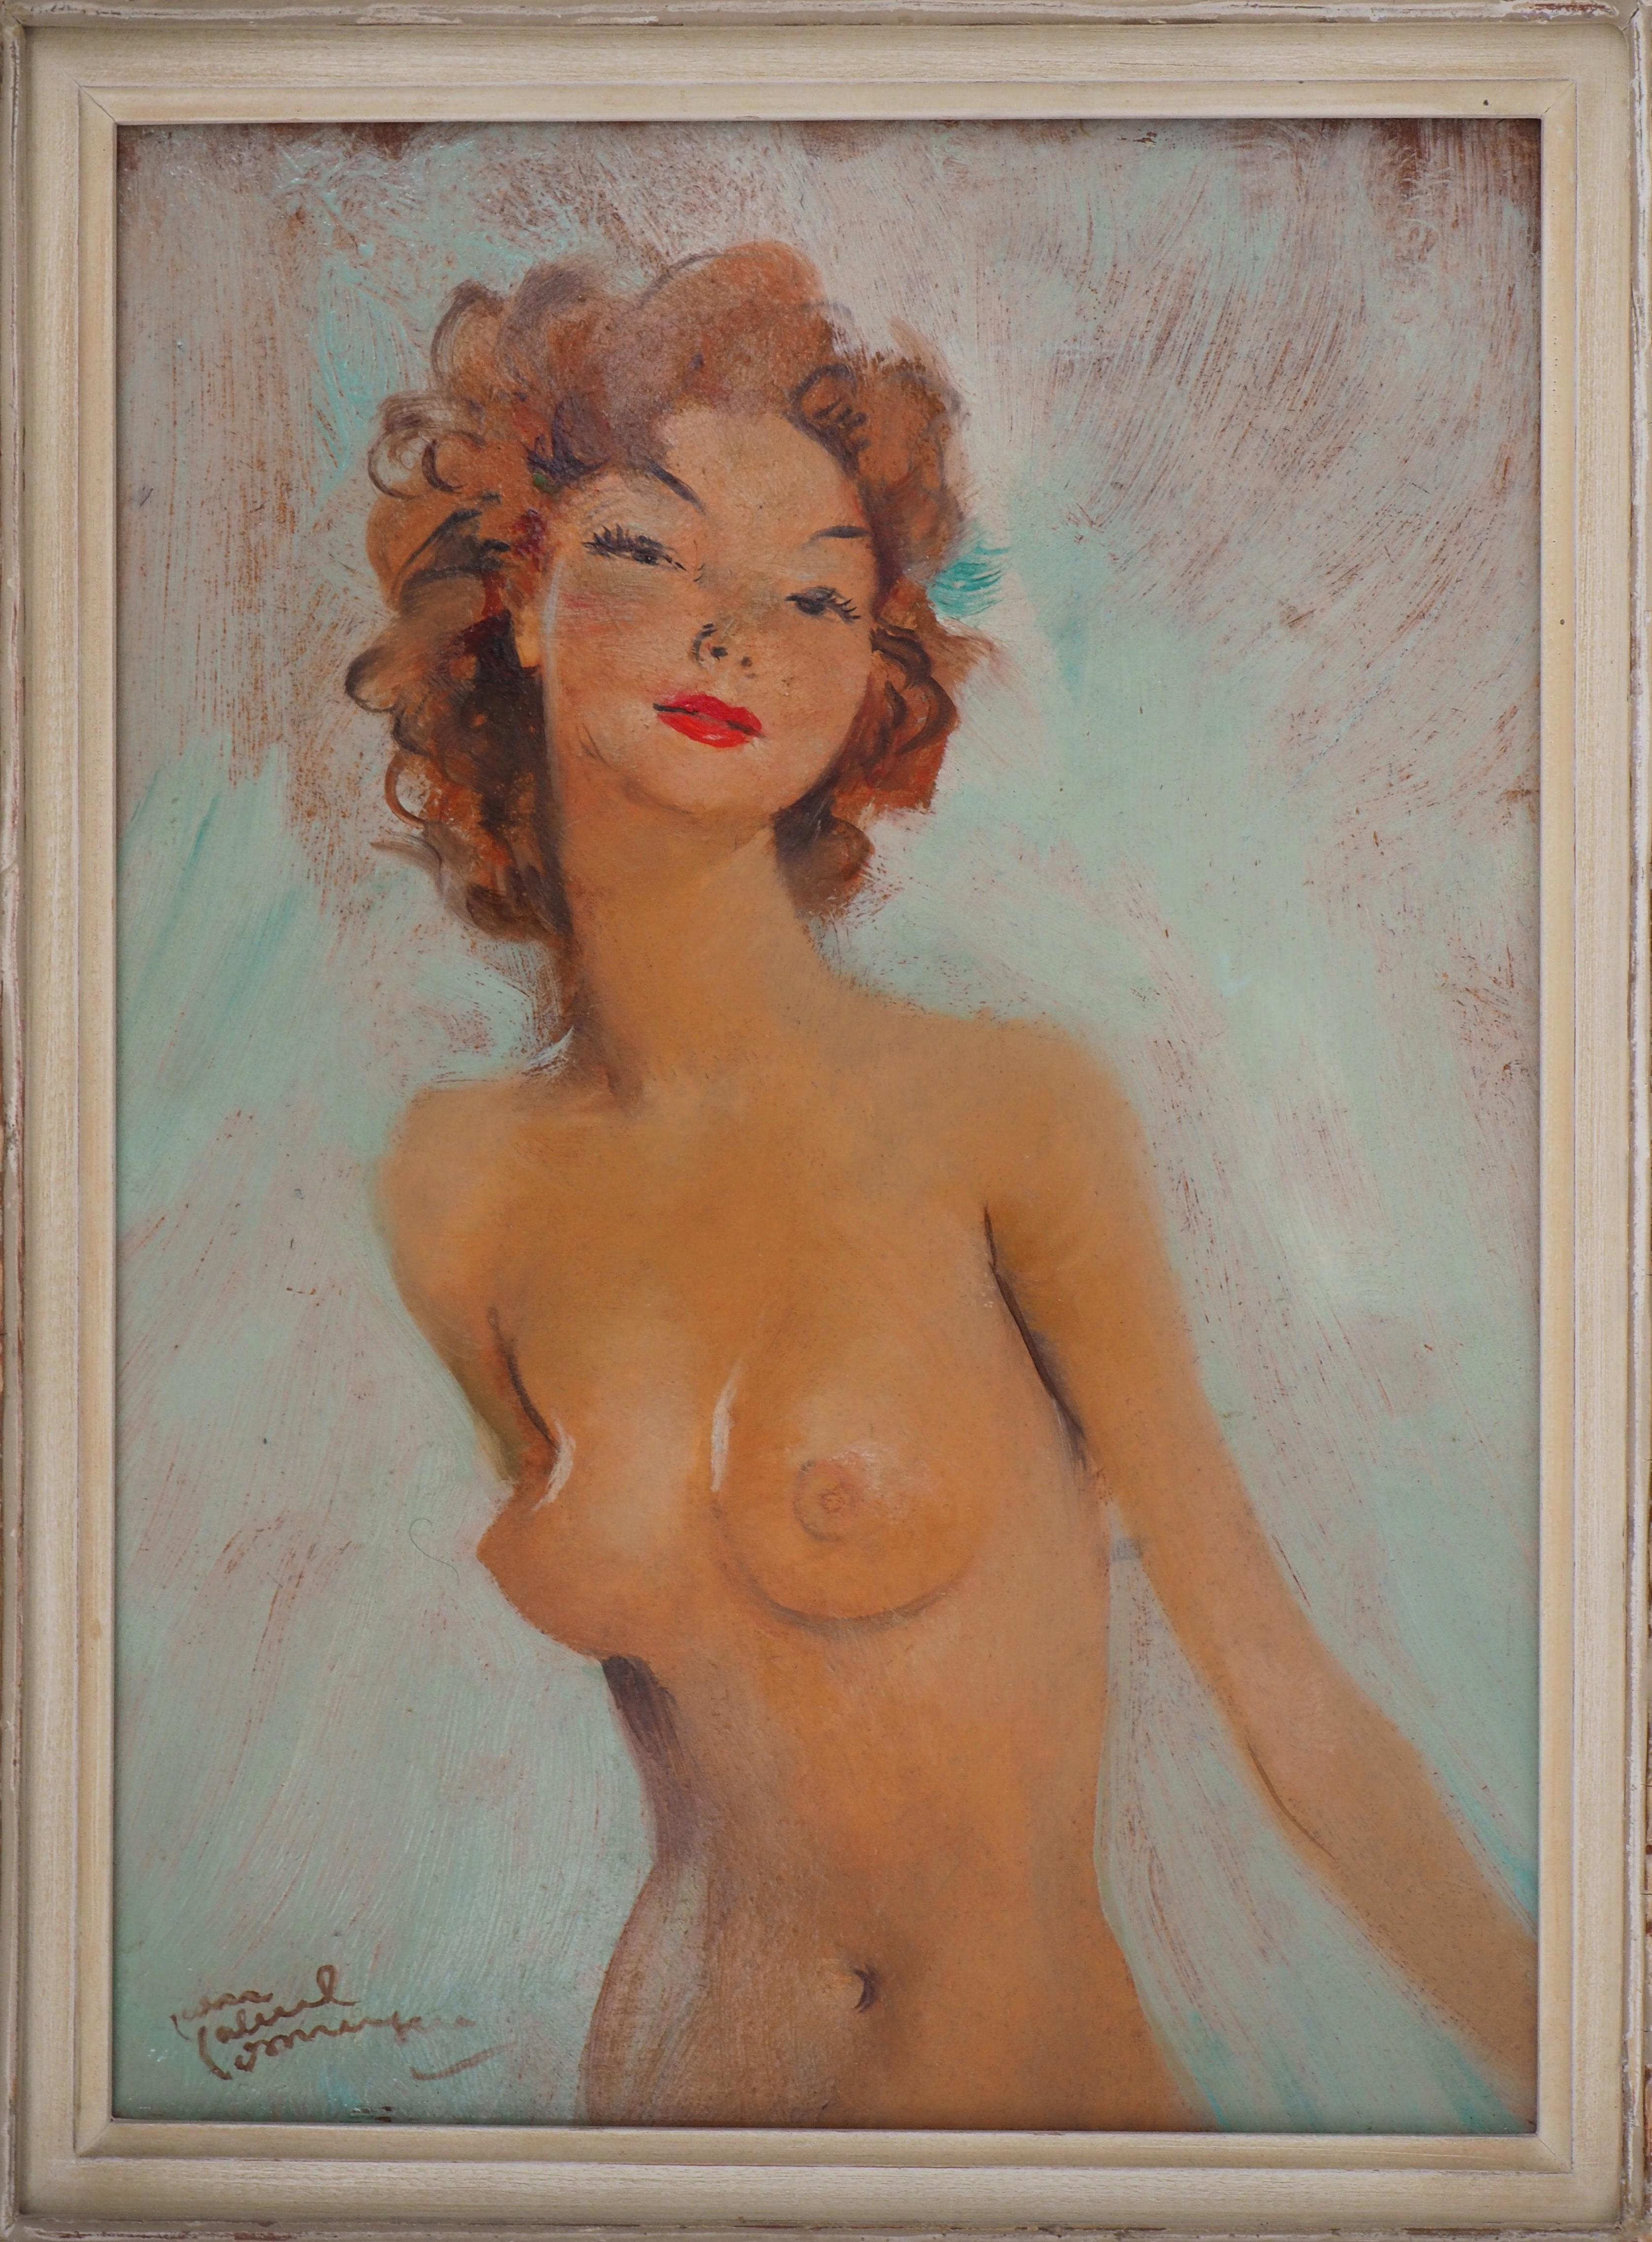 Smilling Model - Original handsigned oil painting - Modern Painting by Jean-Gabriel Domergue